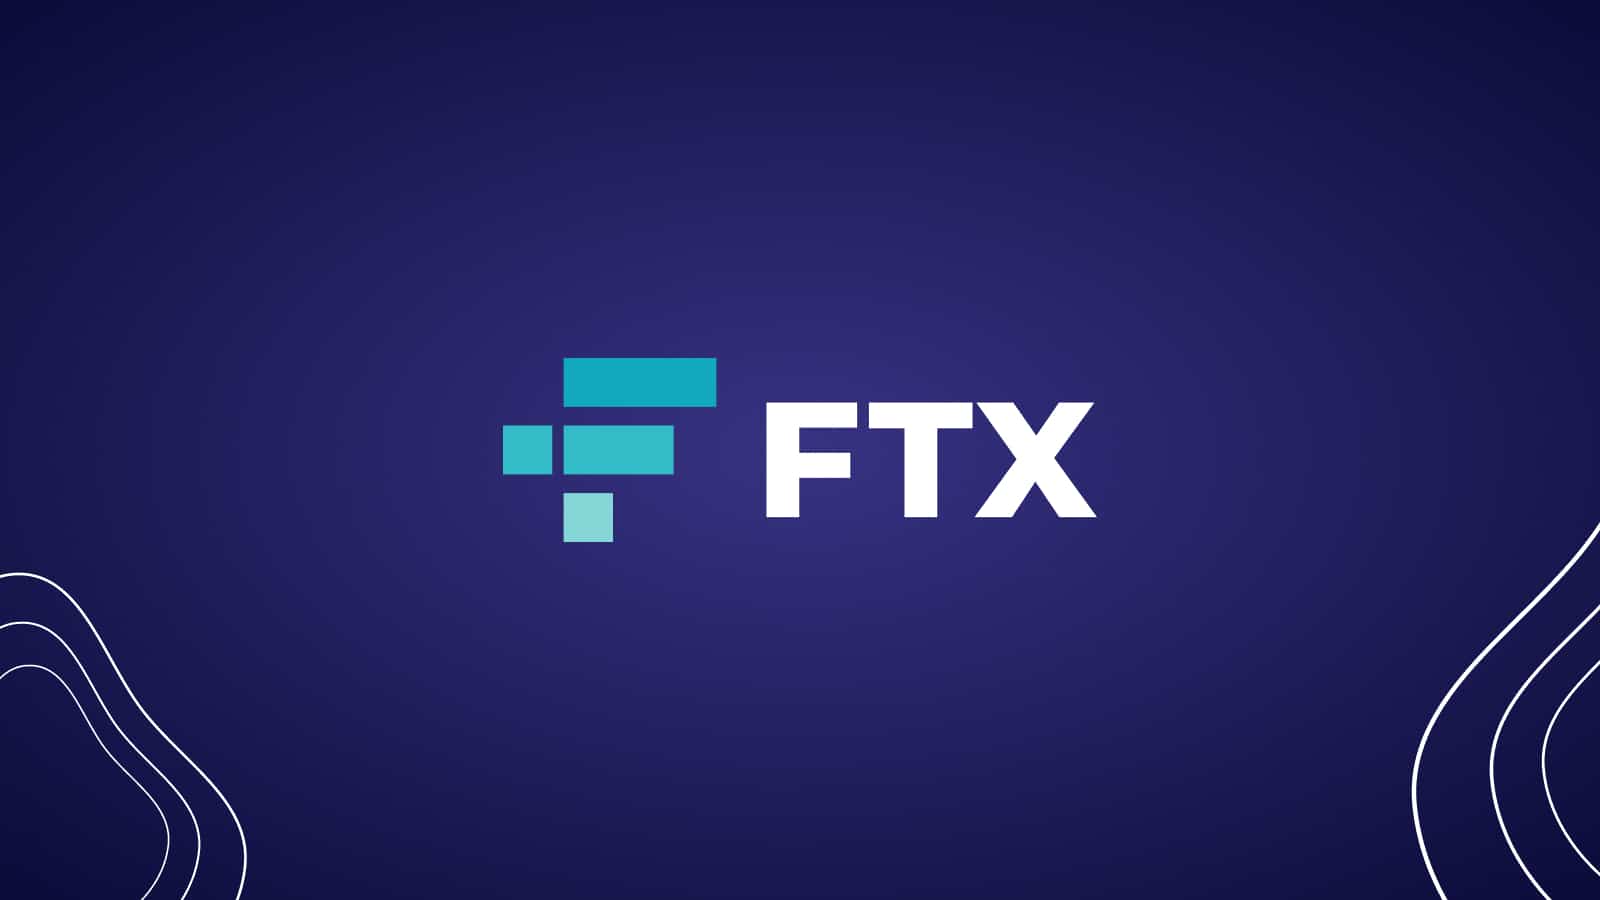 Ftx Featured Image